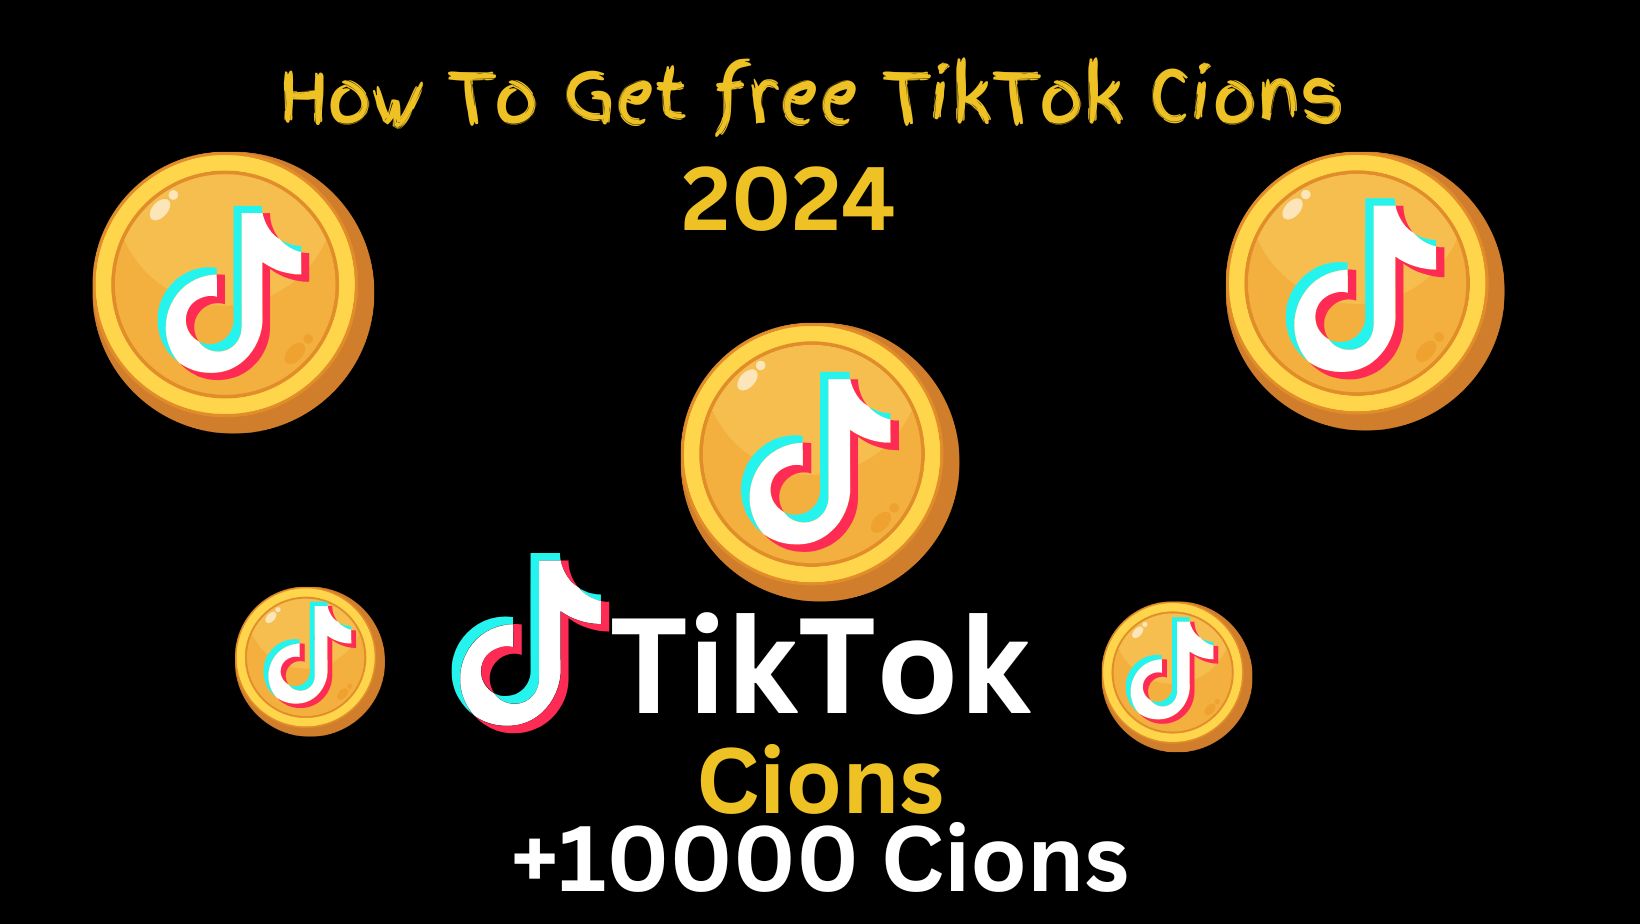 What Is Tiktok Coins?: How to Get Free TikTok Coins and Buy?